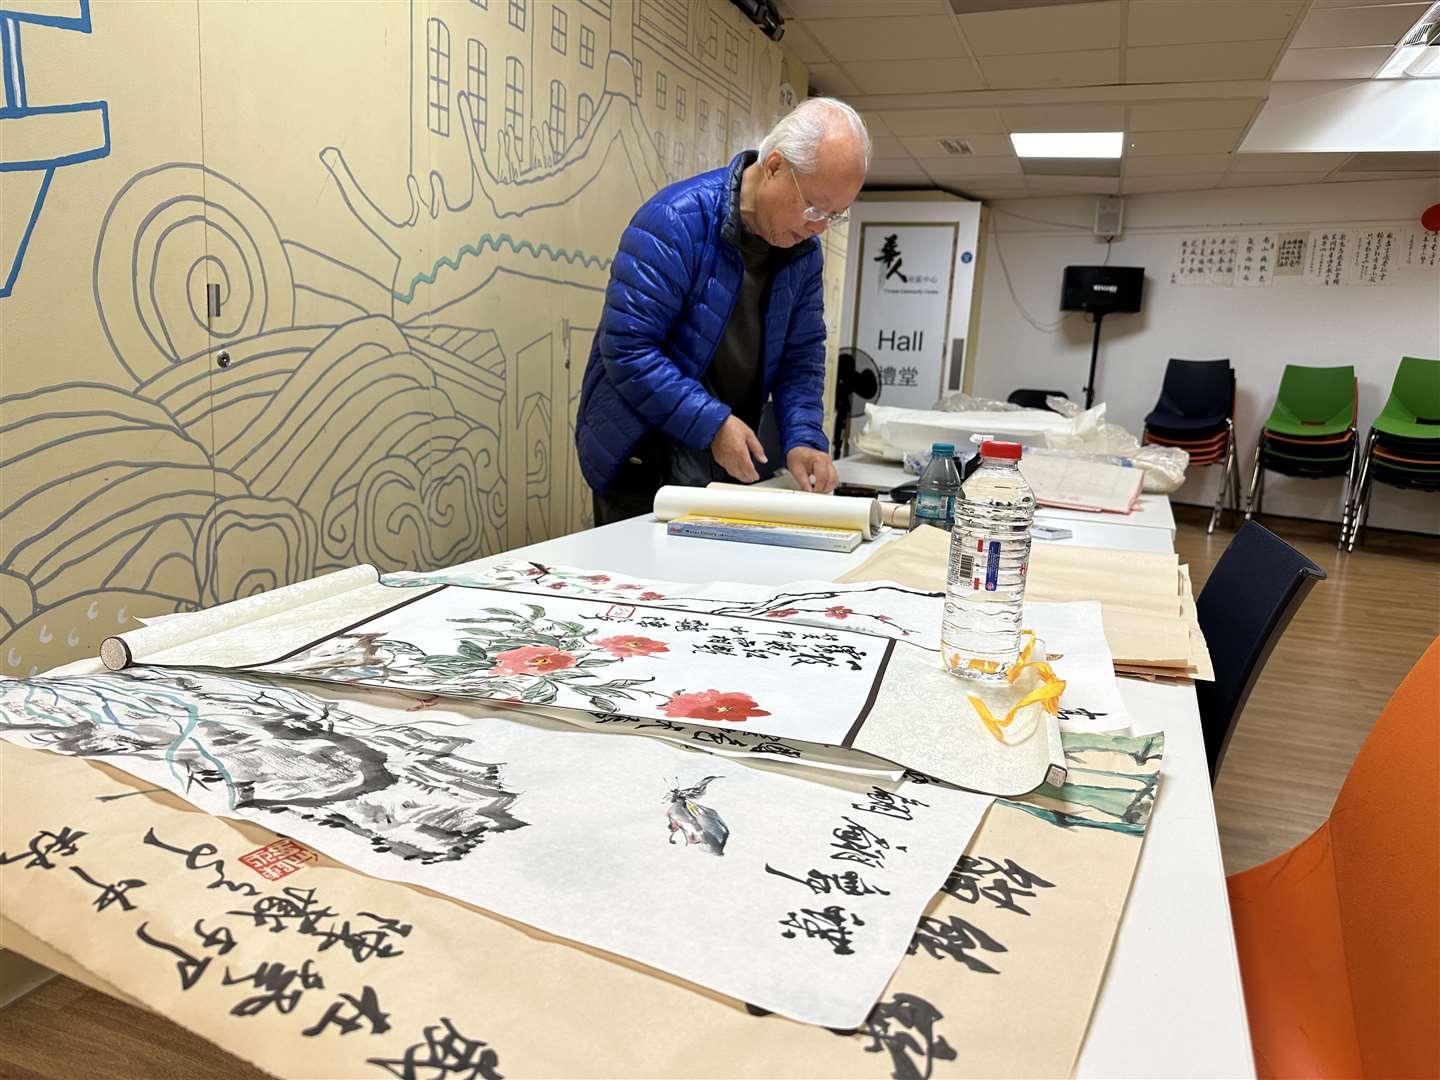 The London Chinese Community Centre offers workshops to celebrate and highlight Chinese culture (London Chinese Community Centre/PA)